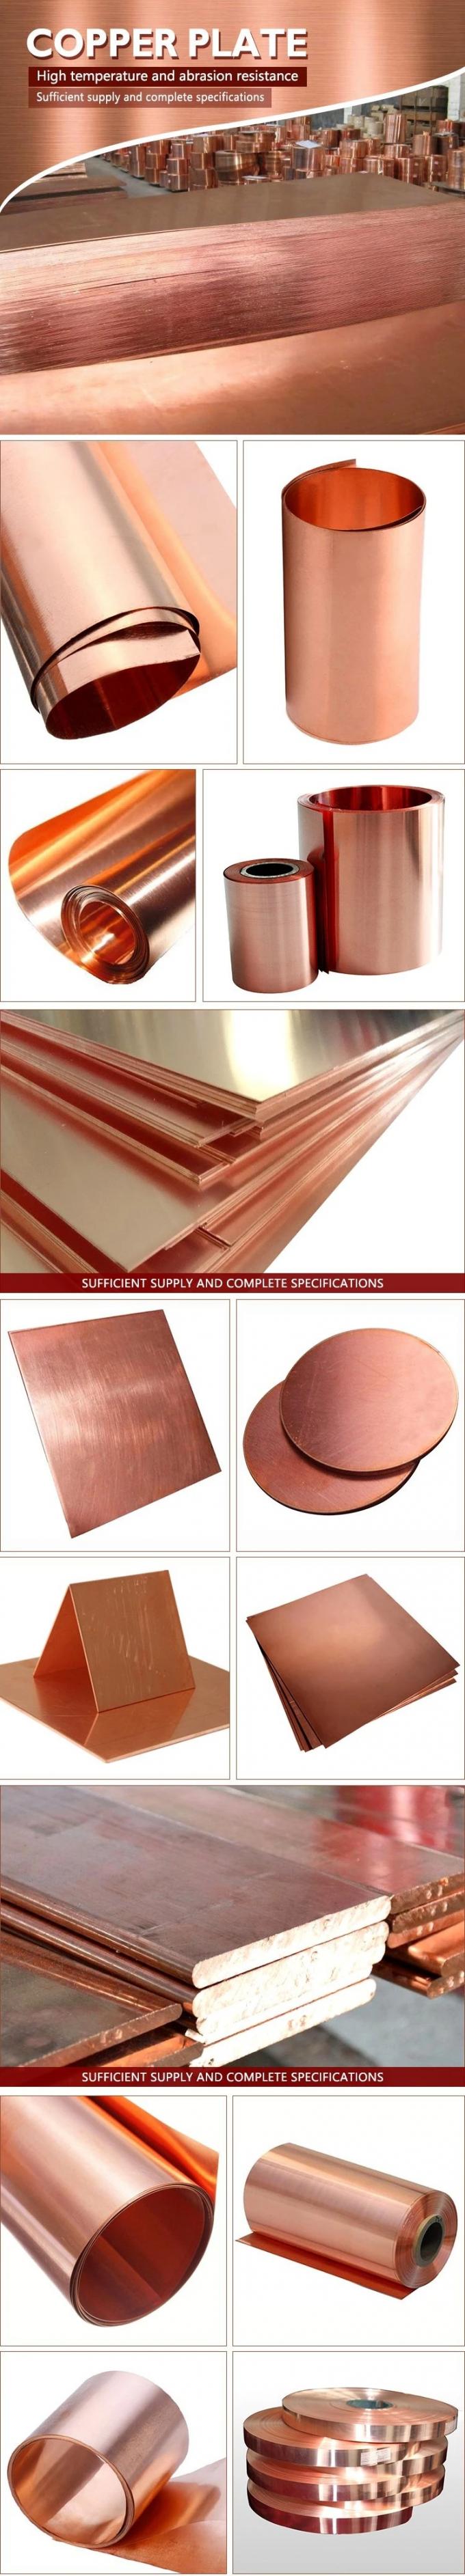 22 Mil  16 Mil 10 Mil C122 Copper Sheet Plate Grade AA  Mill Berry 99.99% 0